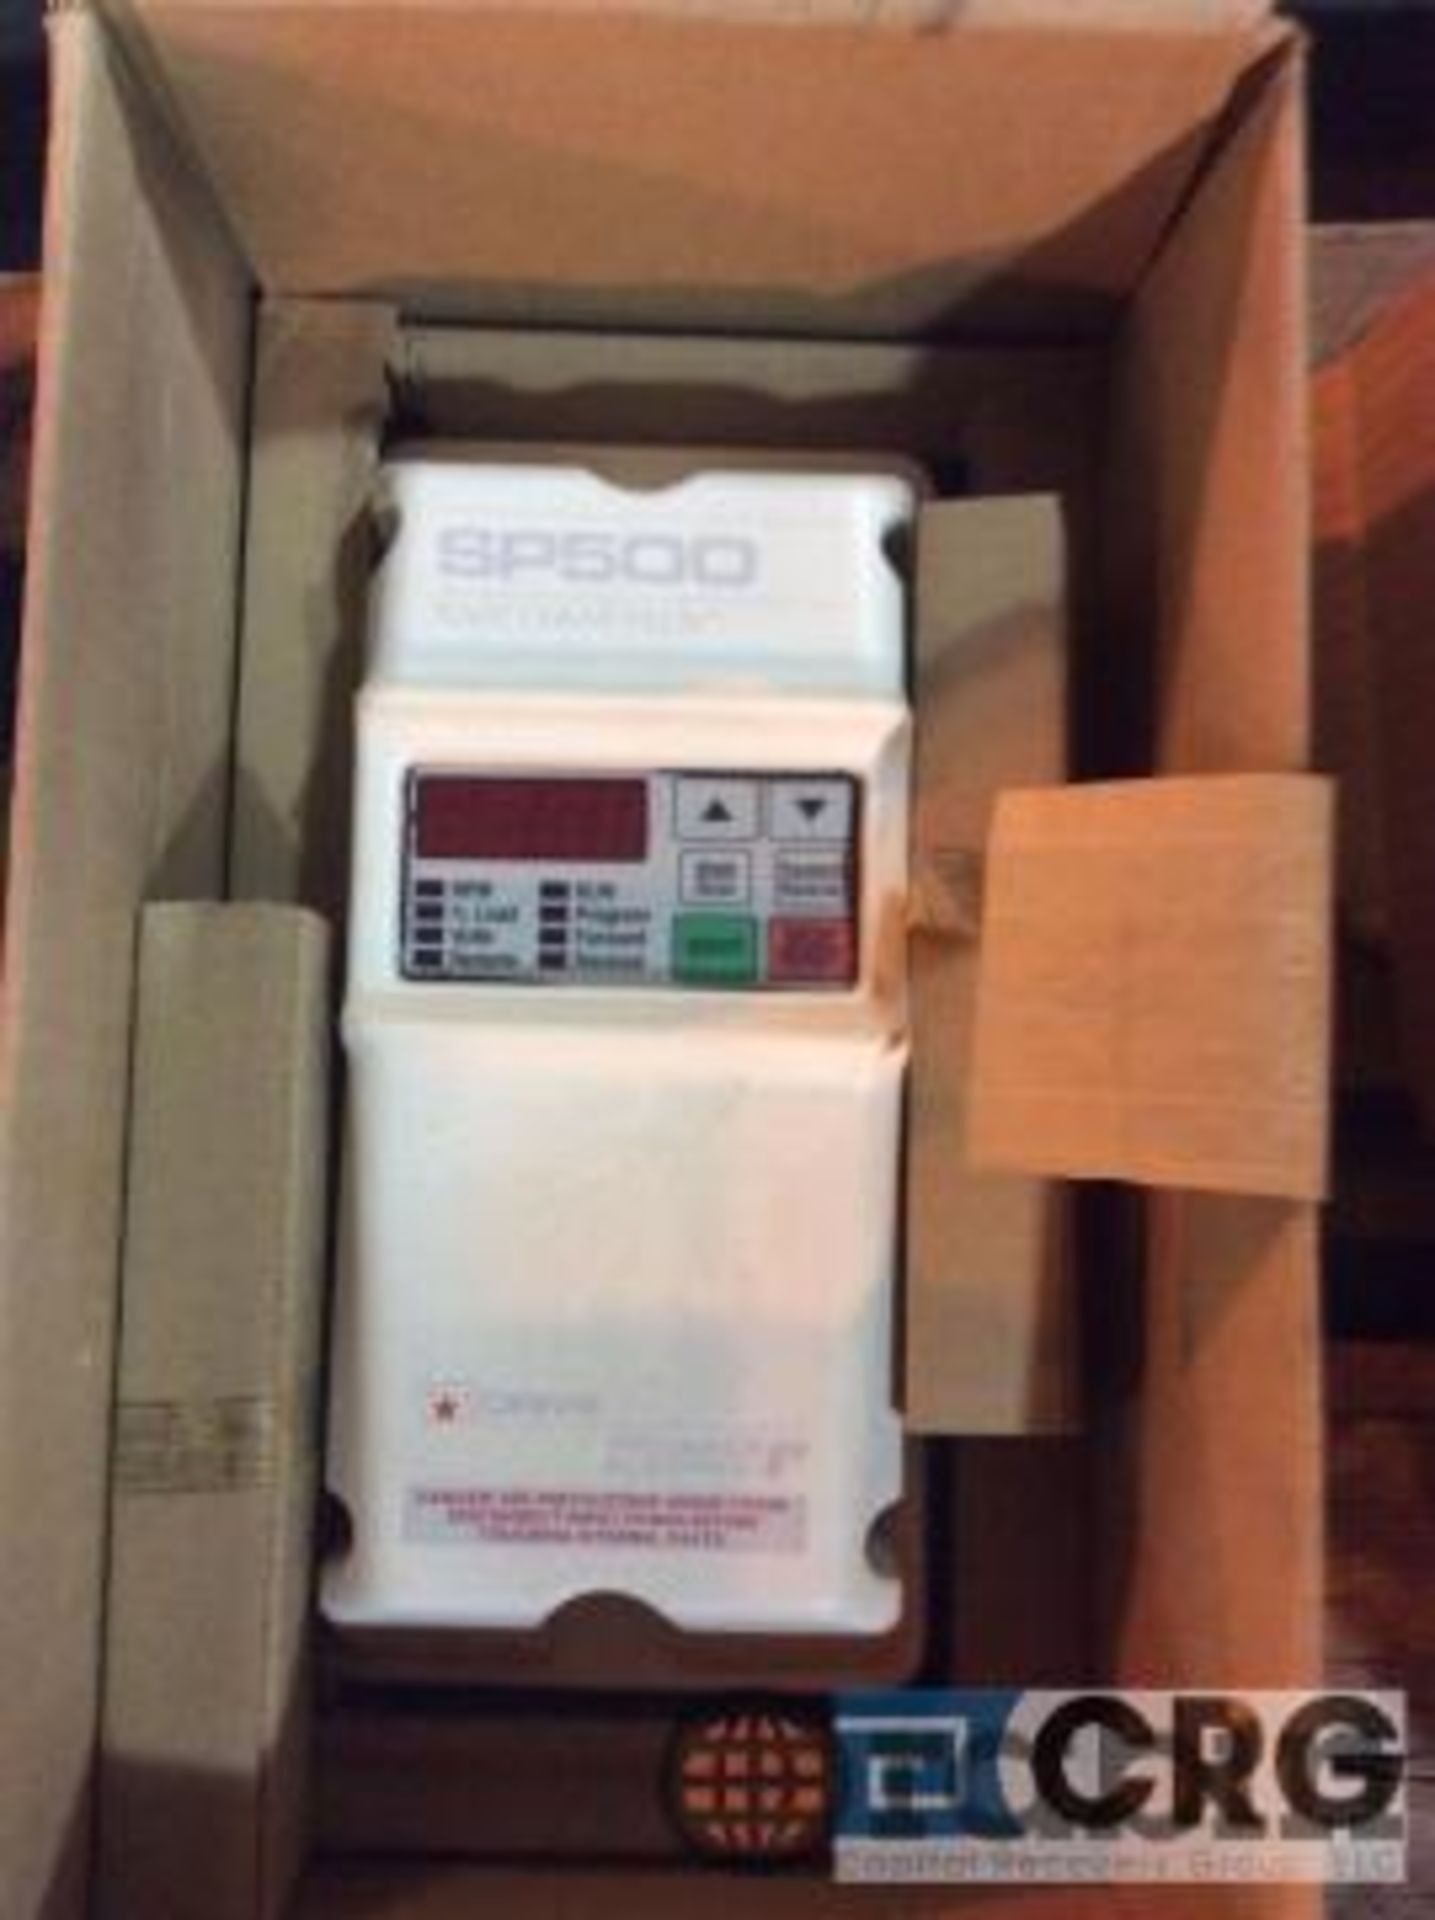 SP500 easy clean drive, model 1SU24001, NEW IN BOX [Peoria] - Image 2 of 2